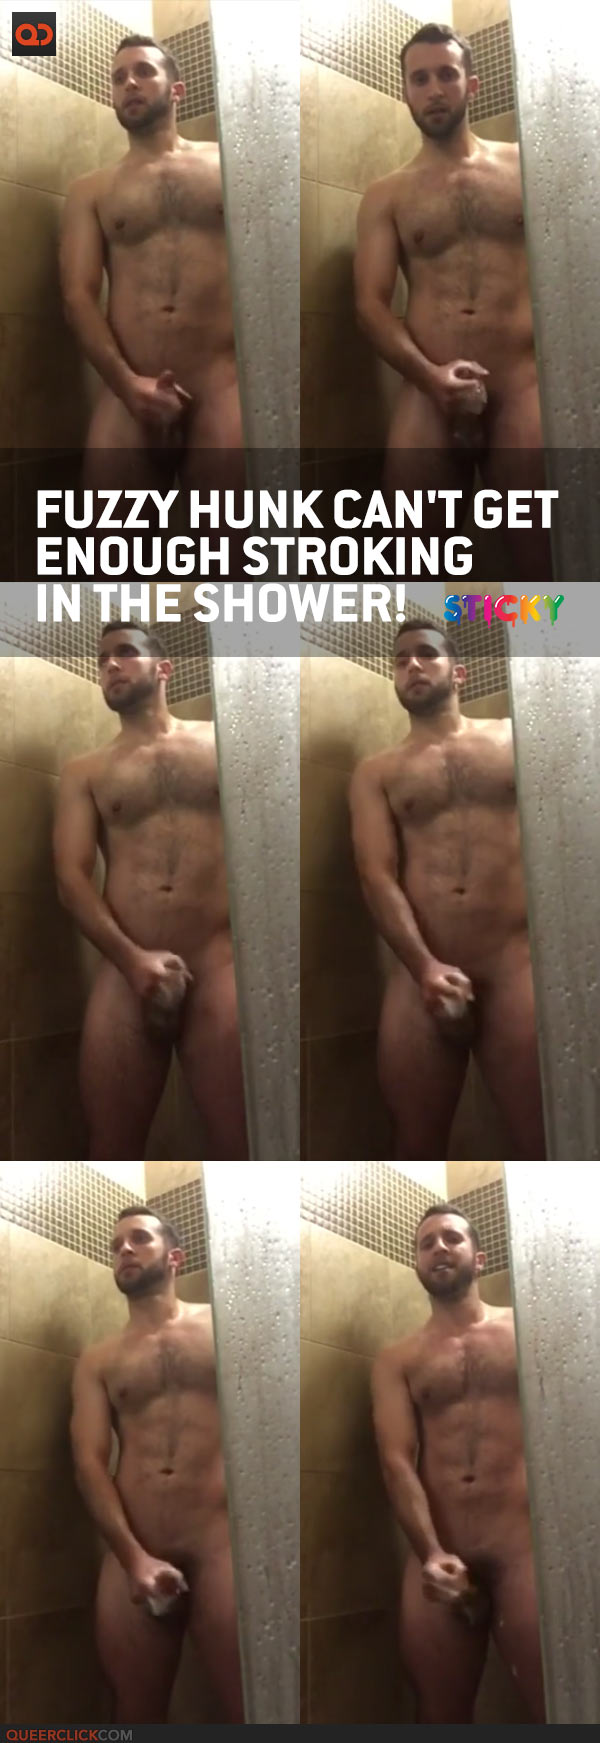 Fuzzy Hunk Can't Ger Enough Stroking In The Shower!